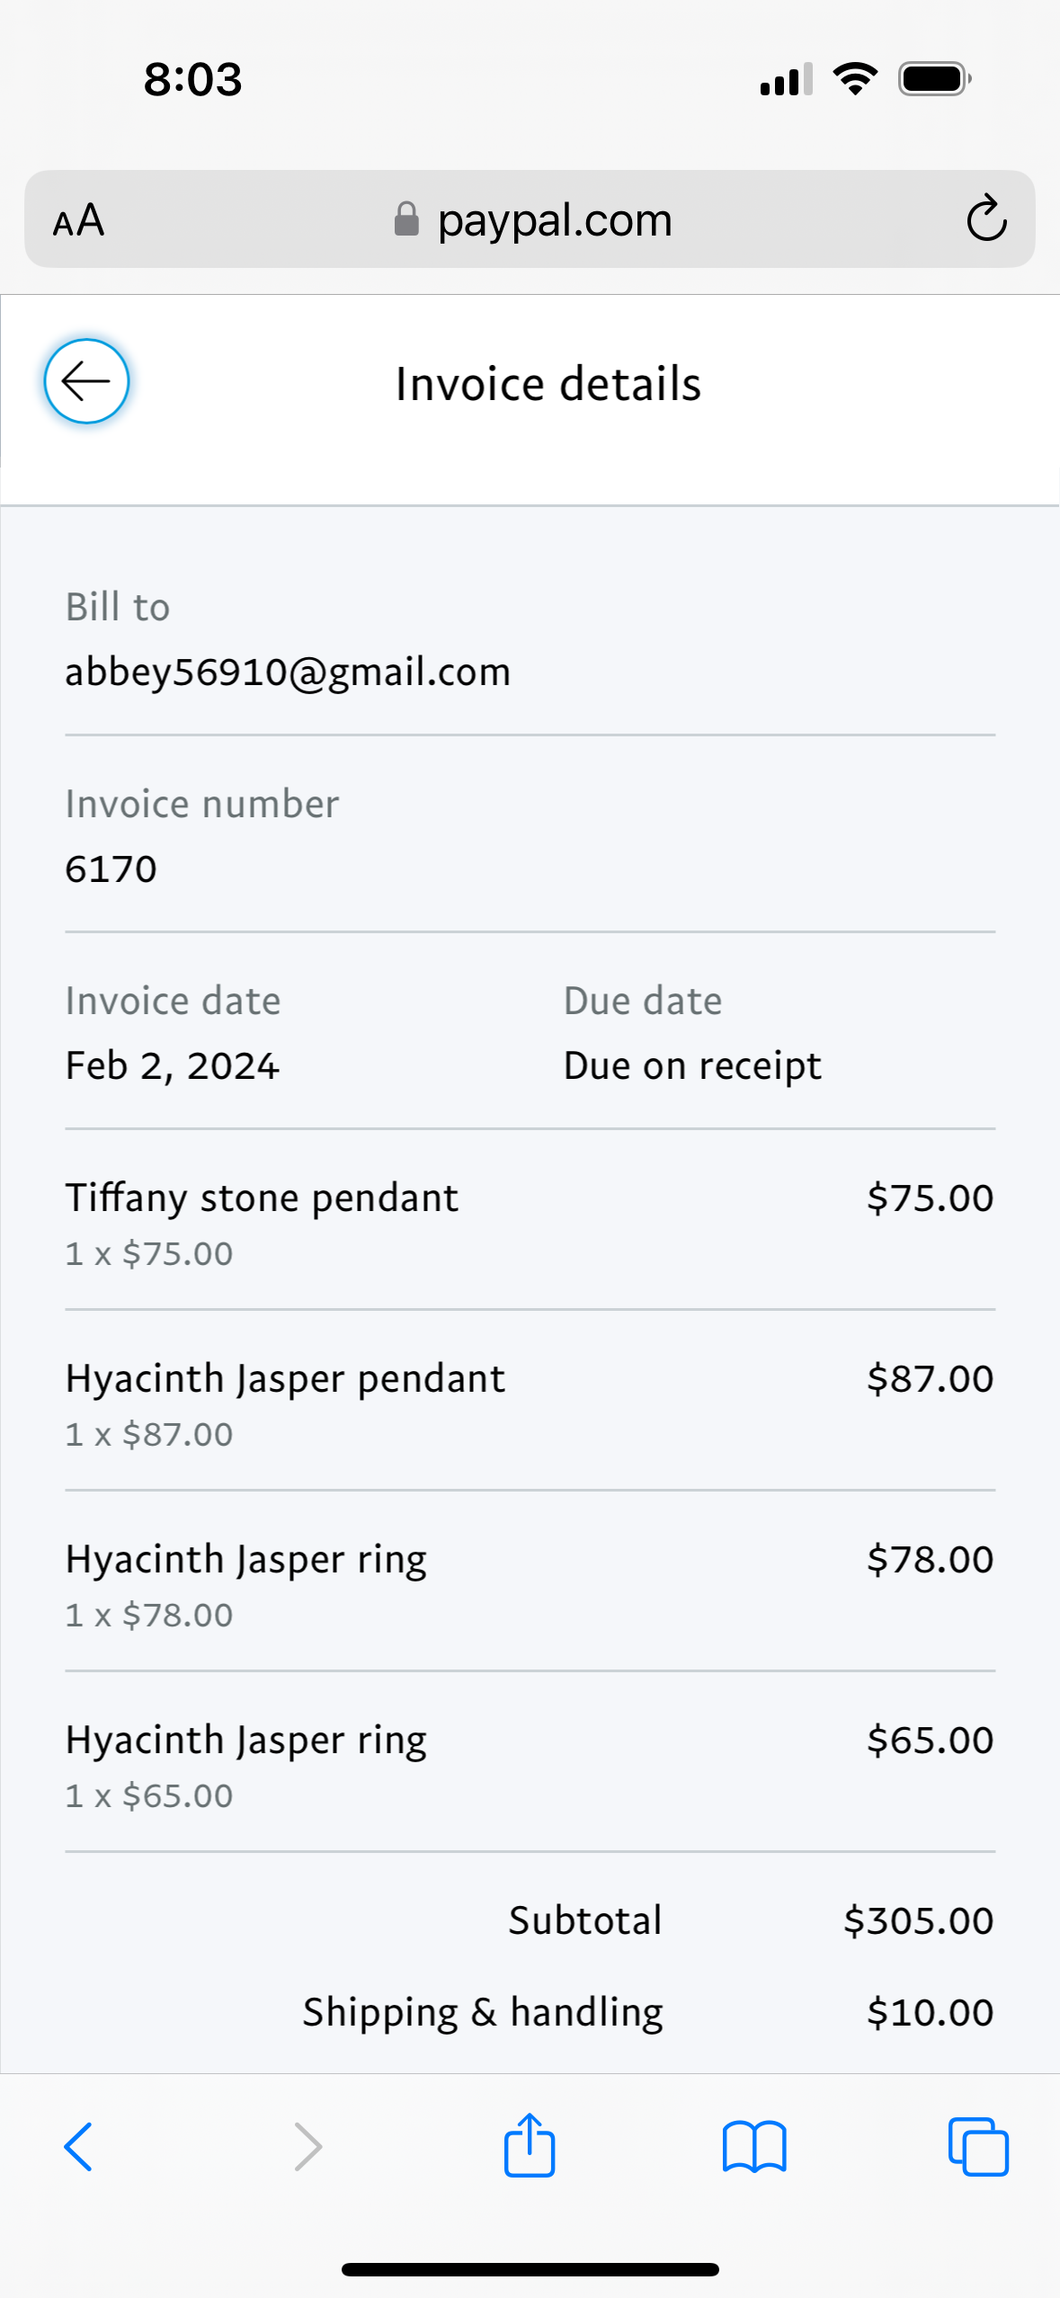 Live sale invoice for @abbey